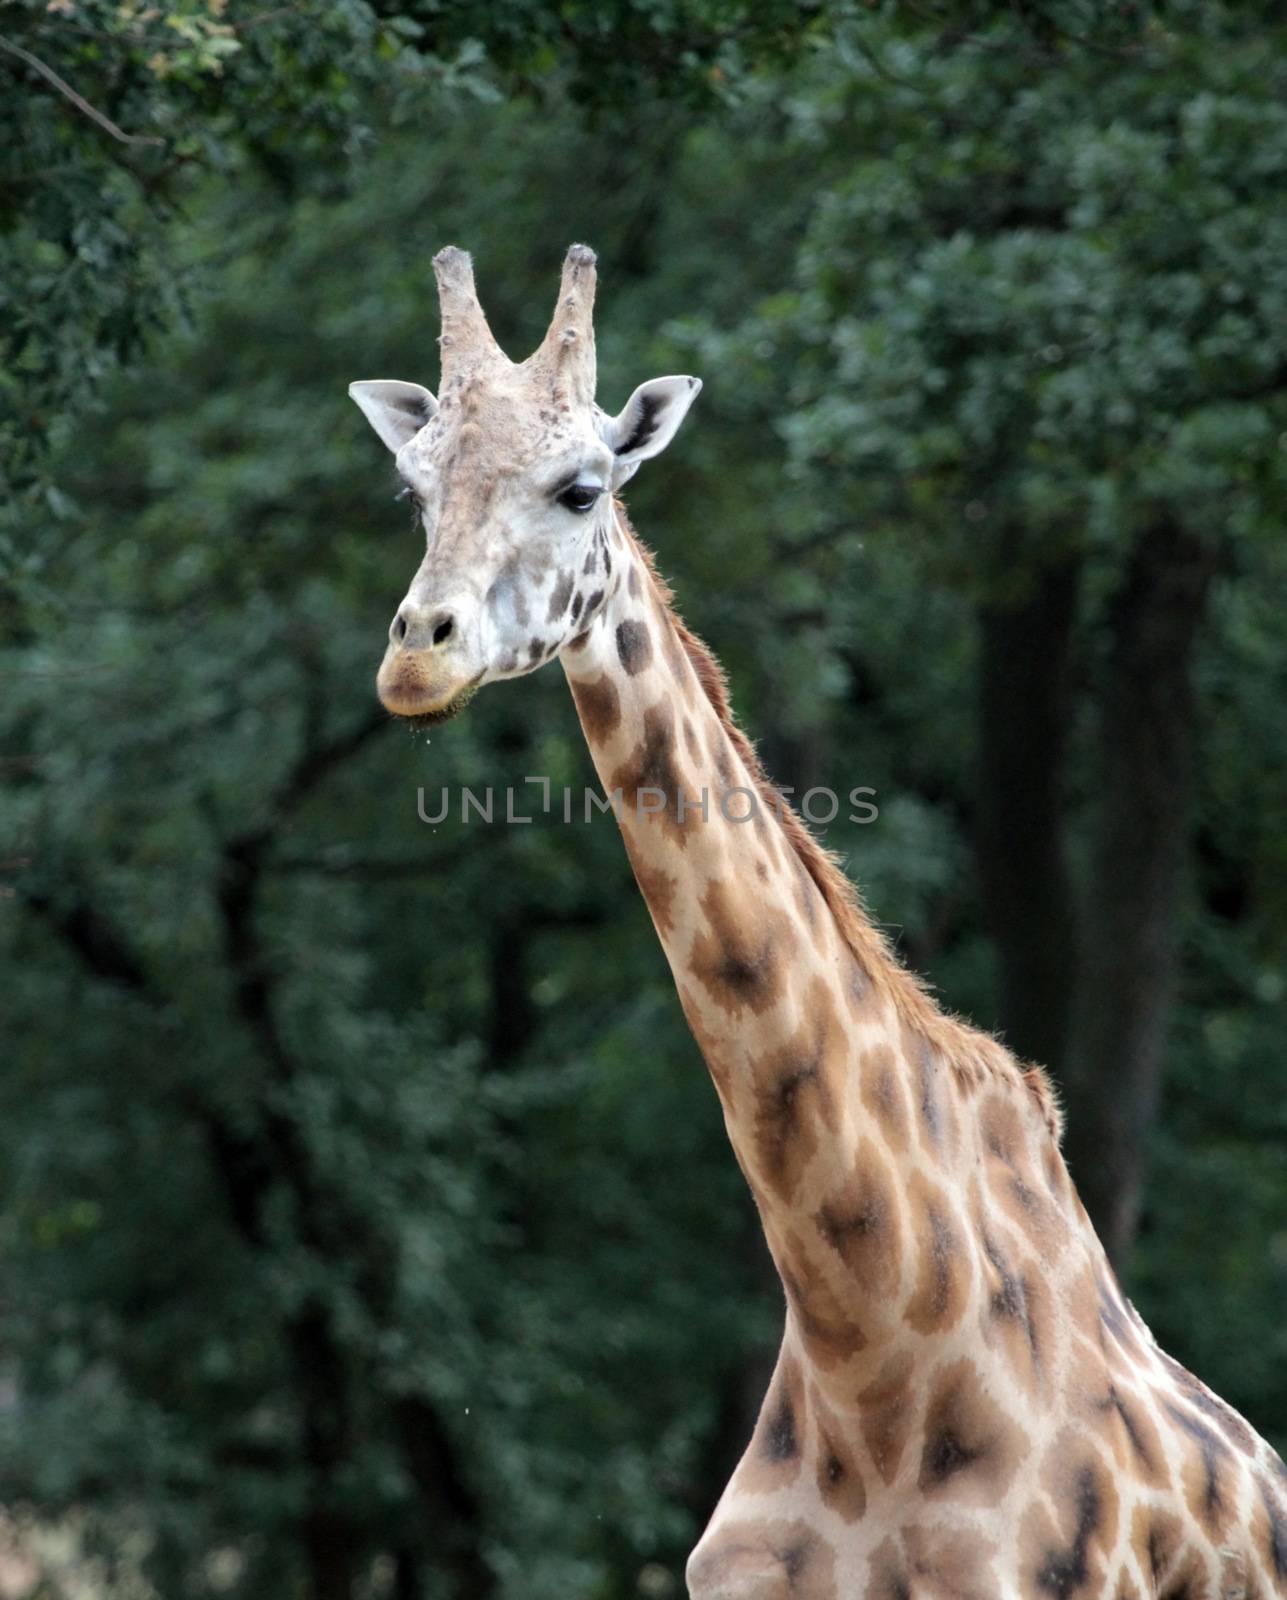 Portrait of a giraffe, camelopardalis, against green leaves background